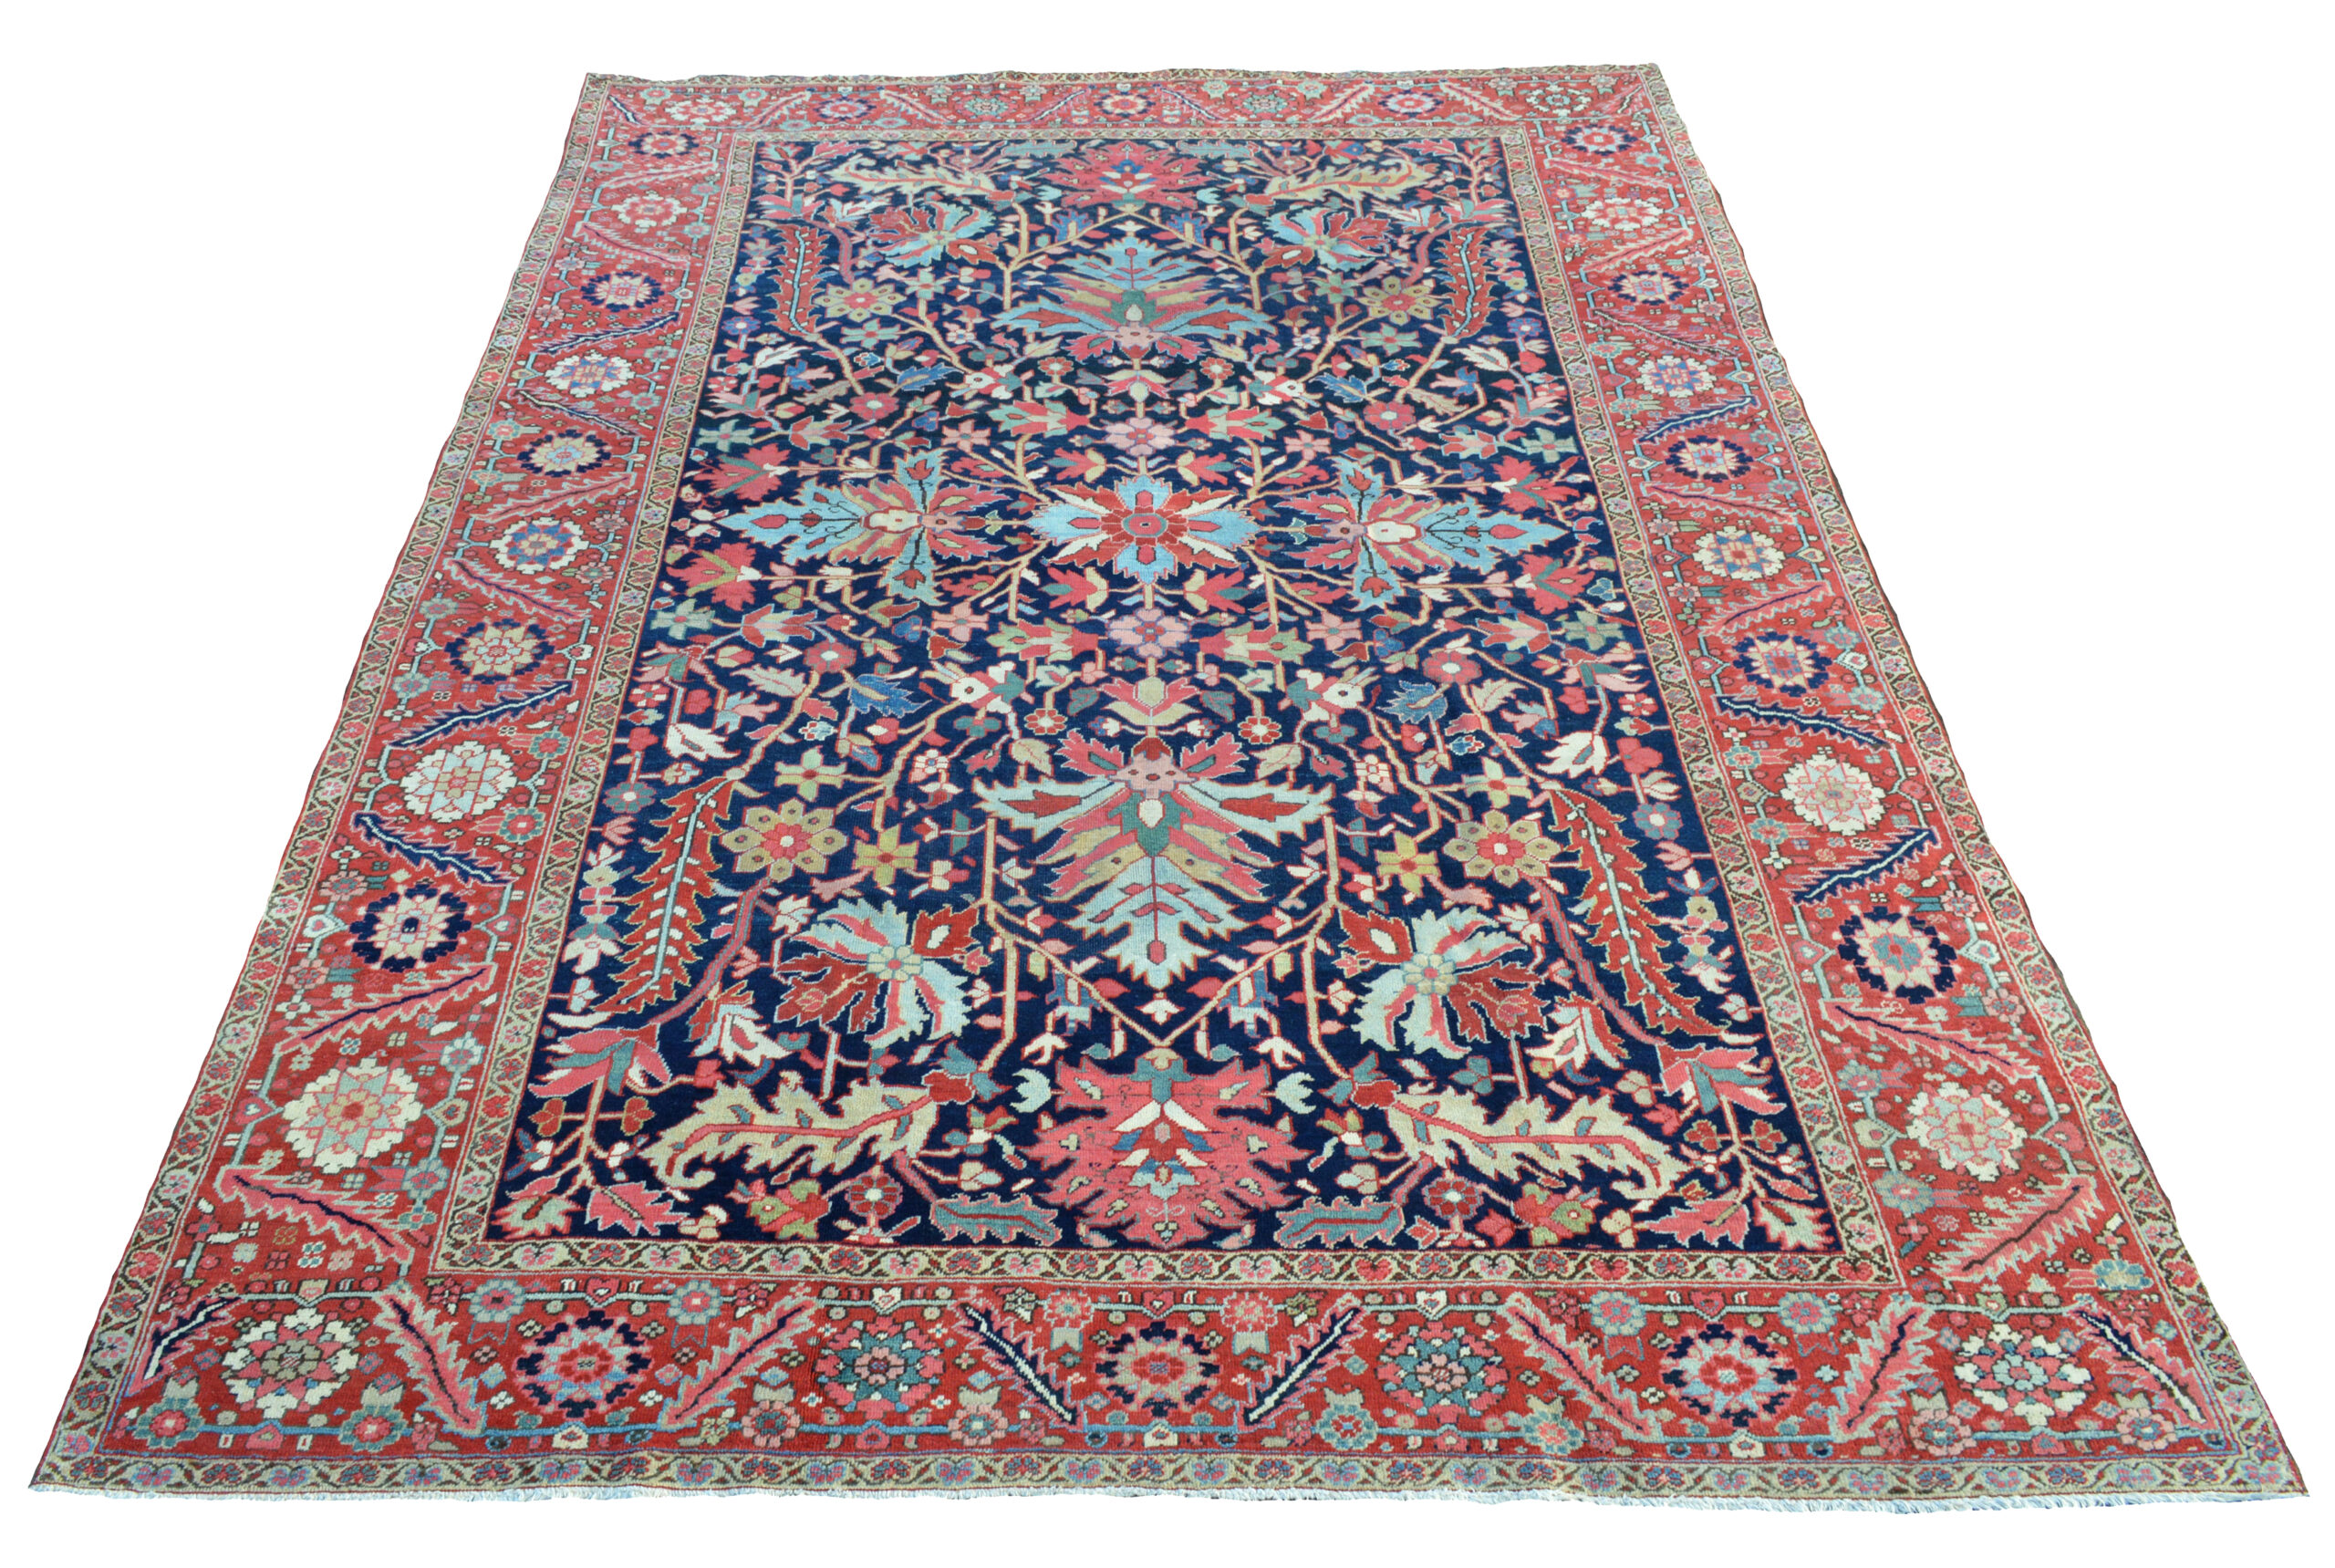 Douglas Stock Gallery offers an outstanding selection of antique Persian Heriz rugs and room size Heriz carpets. An antique Heriz carpet, circa 1910, with large palmettes leaves and stylized flowers on a navy blue field that is framed by a brick red border, circa 1910.